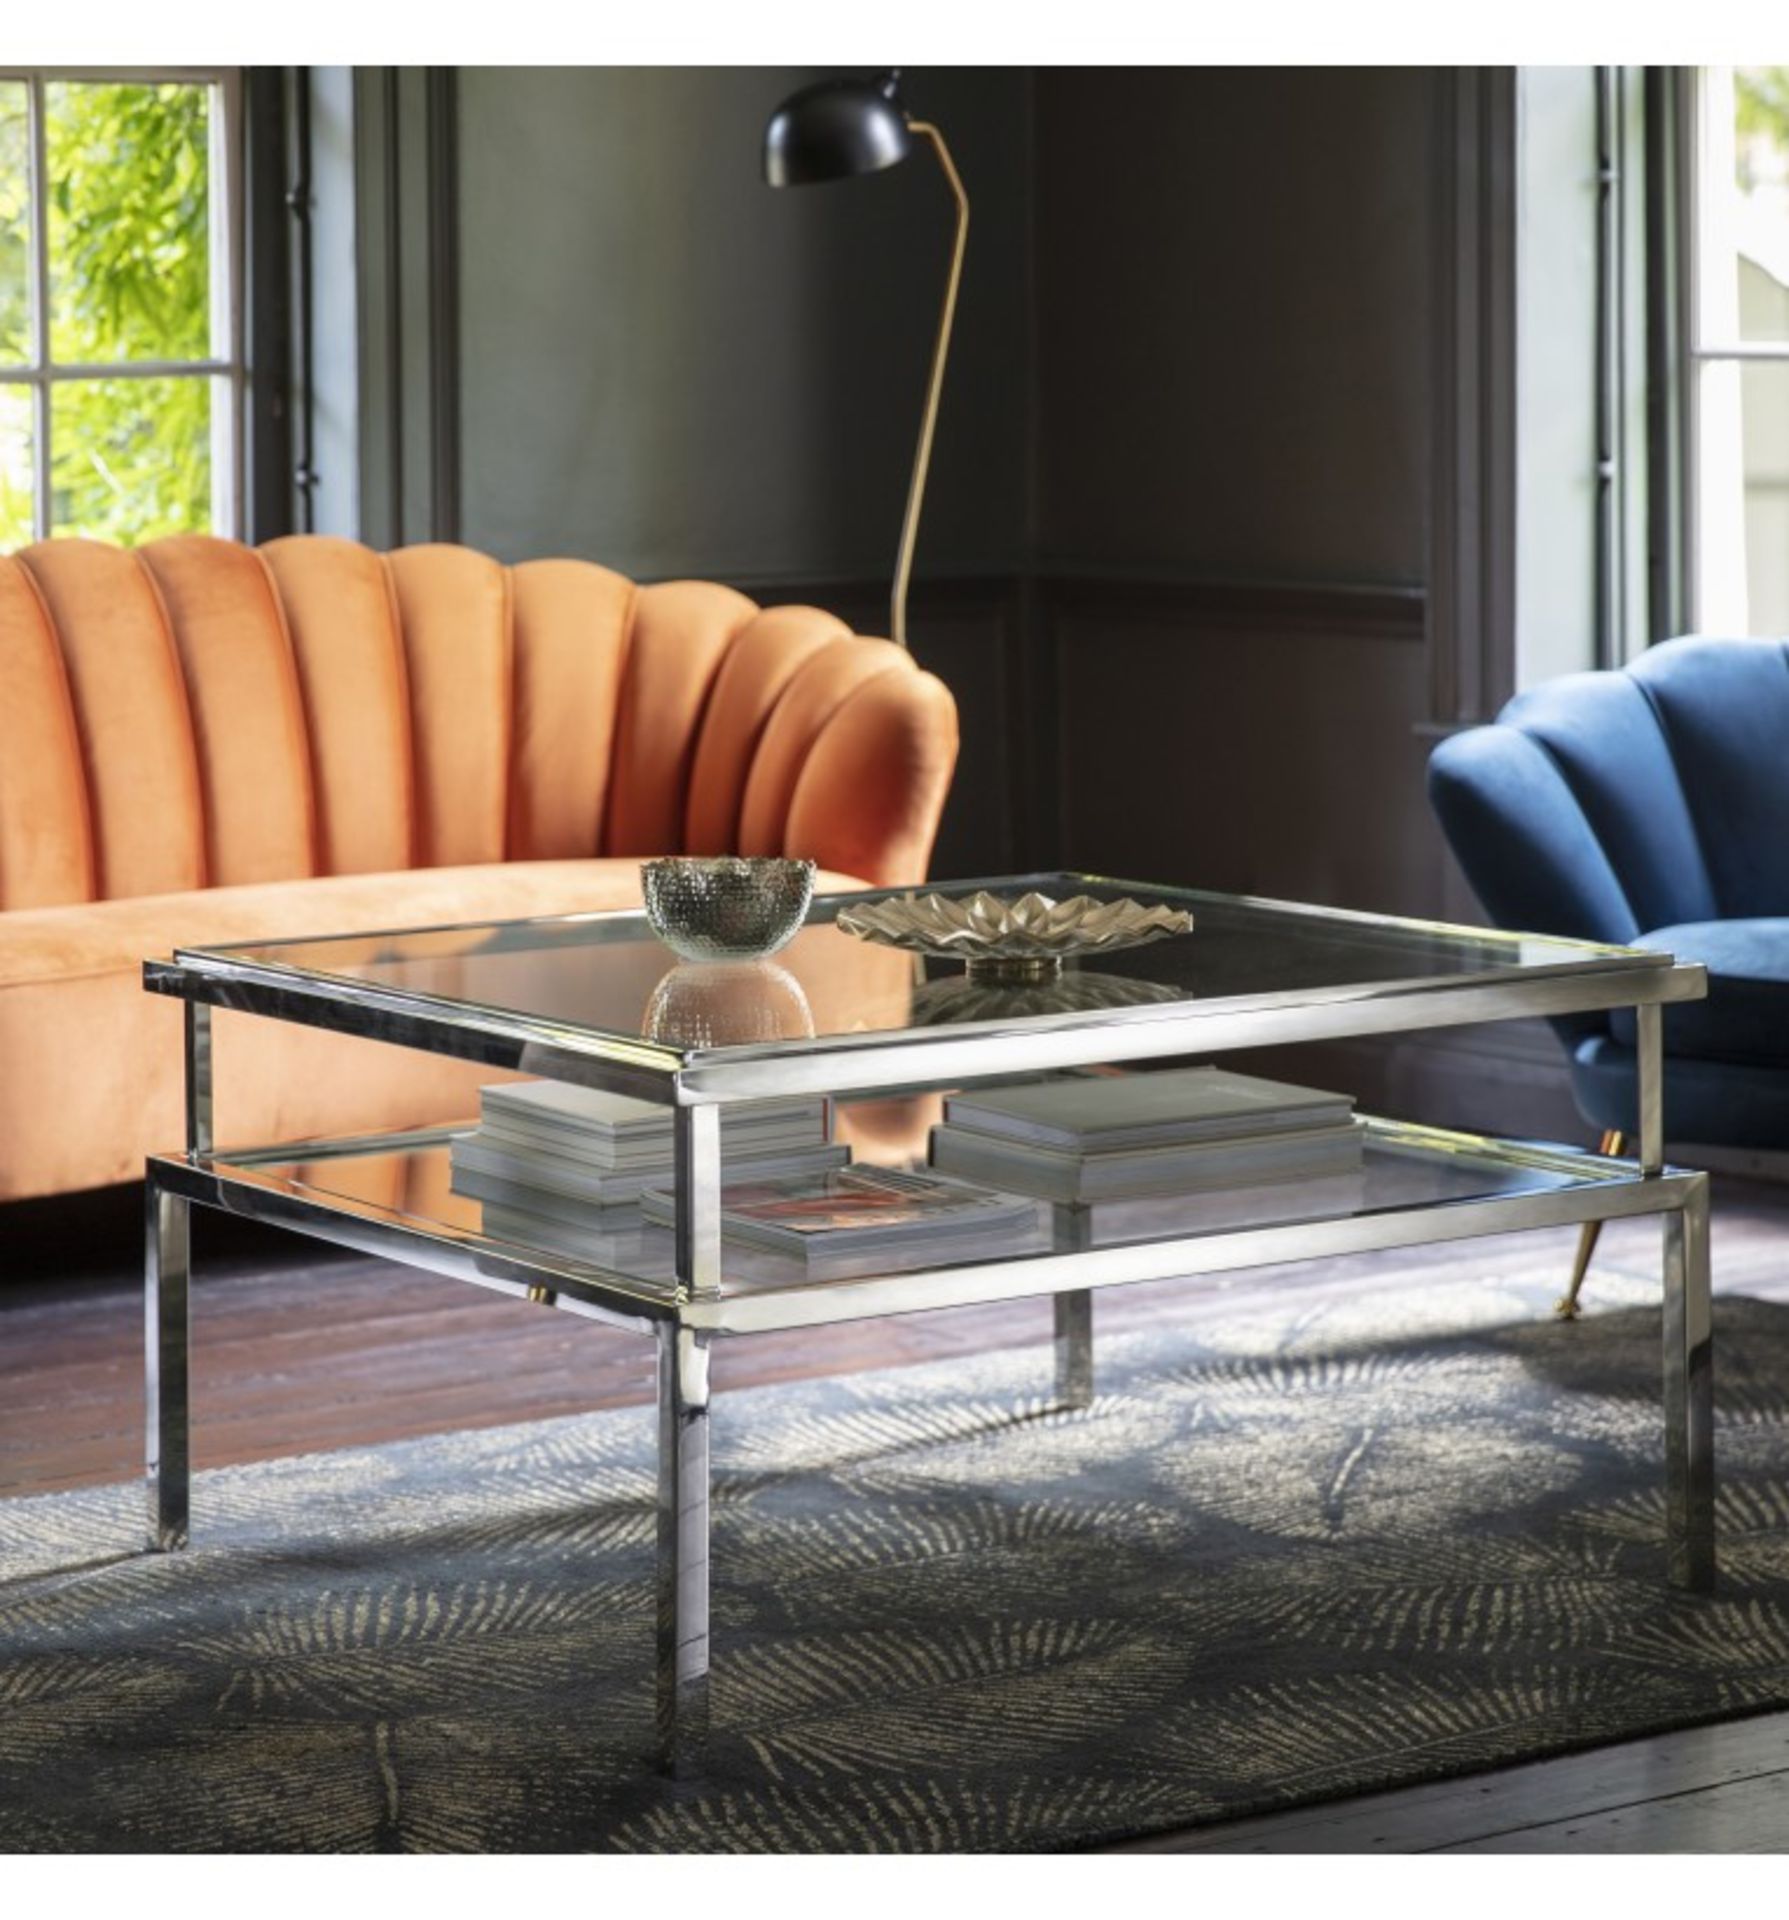 Salerno Coffee Table Silver 580 X 400mm This Two Storey Salerno Sliver Coffee Table Oozes Class